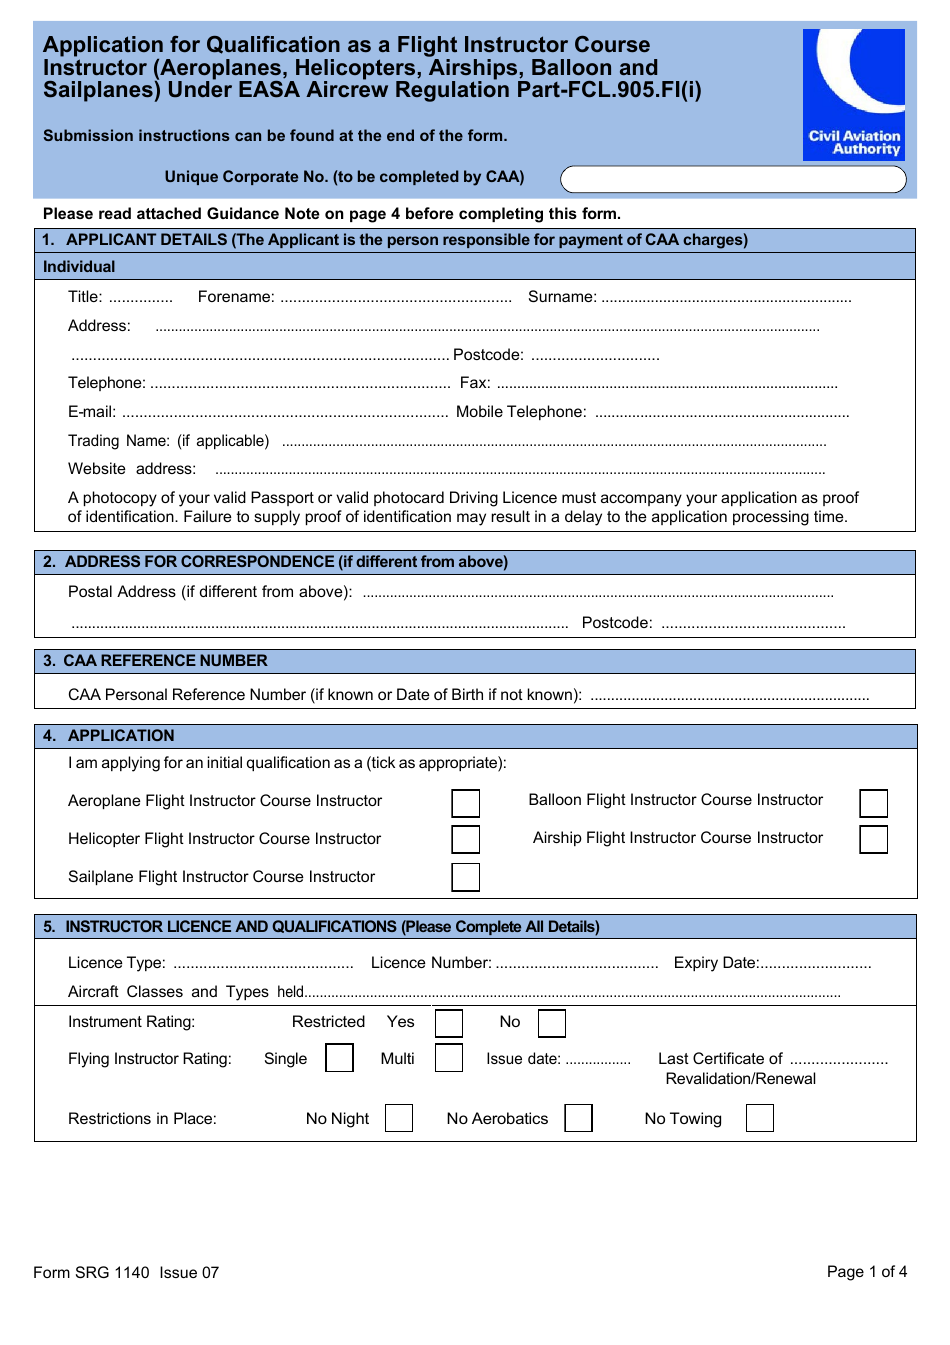 Form SRG1140 Application for Qualification as a Flight Instructor Course Instructor (Aeroplanes, Helicopters, Airships, Balloon and Sailplanes) Under Easa Aircrew Regulation Part-Fcl.905.fi(I) - United Kingdom, Page 1